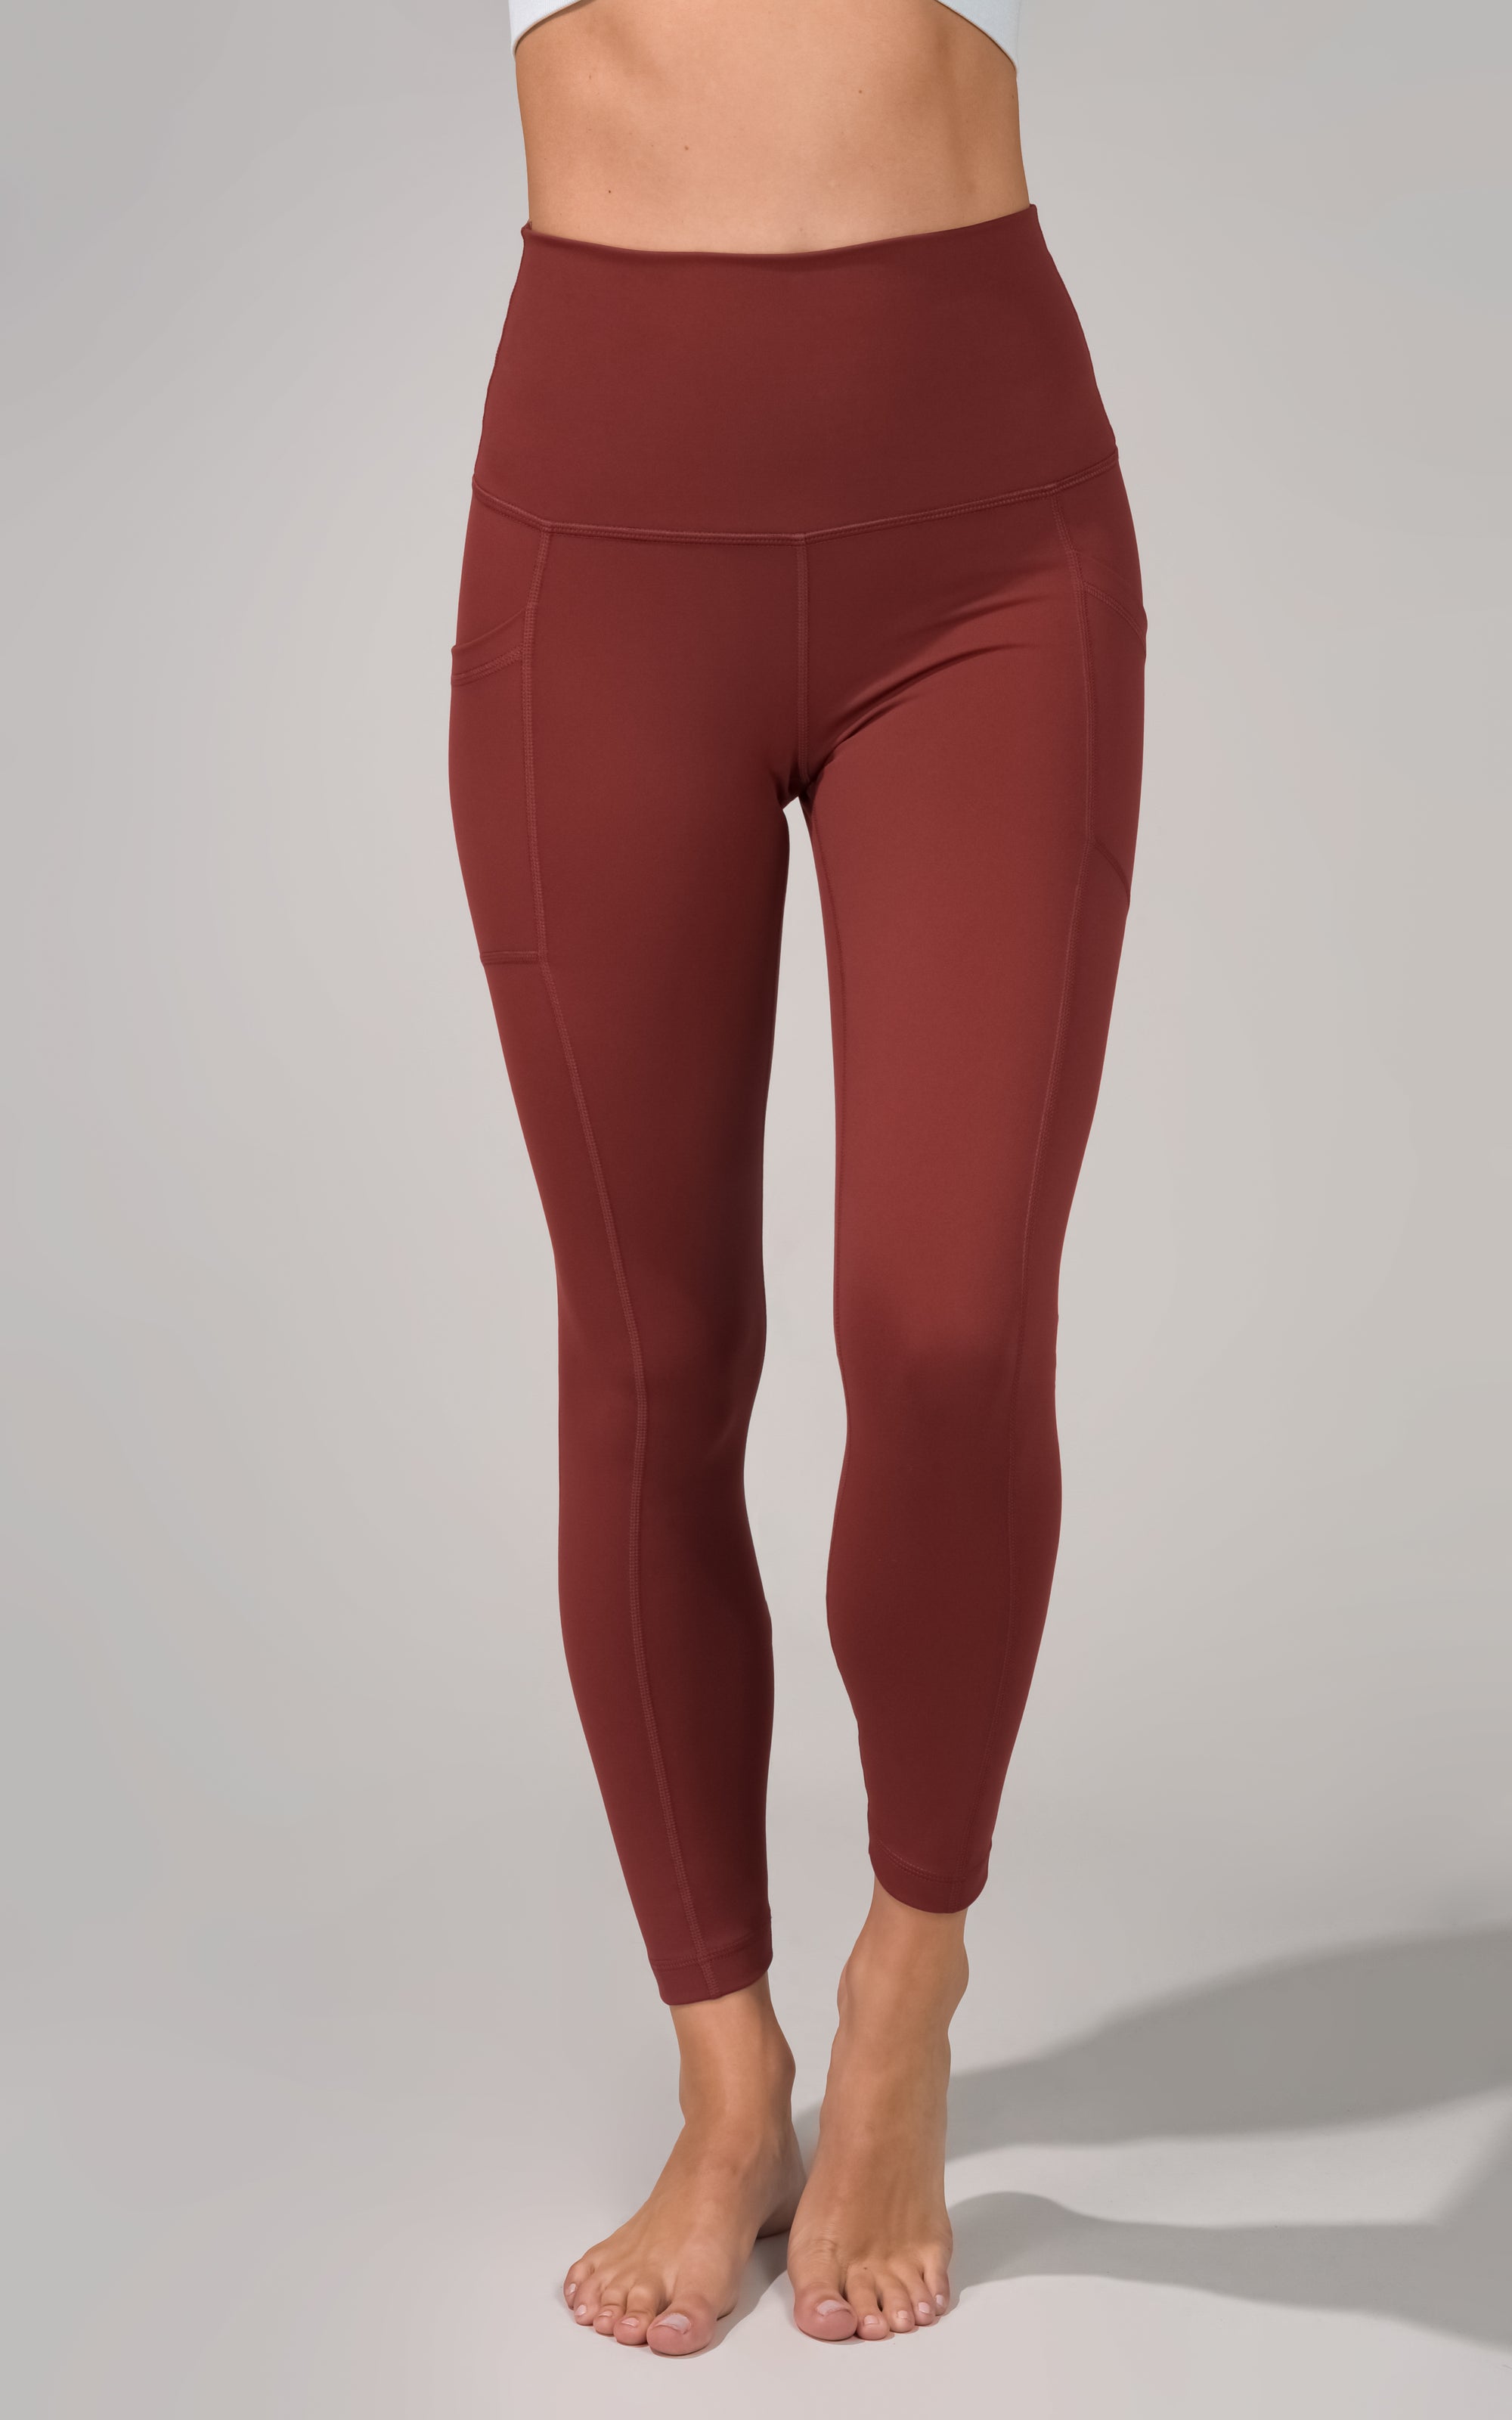 Yogalicious, Pants & Jumpsuits, Yogalicious Lux Ankle Leggings Spiced Red  Syrah Pockets Nwt Size M